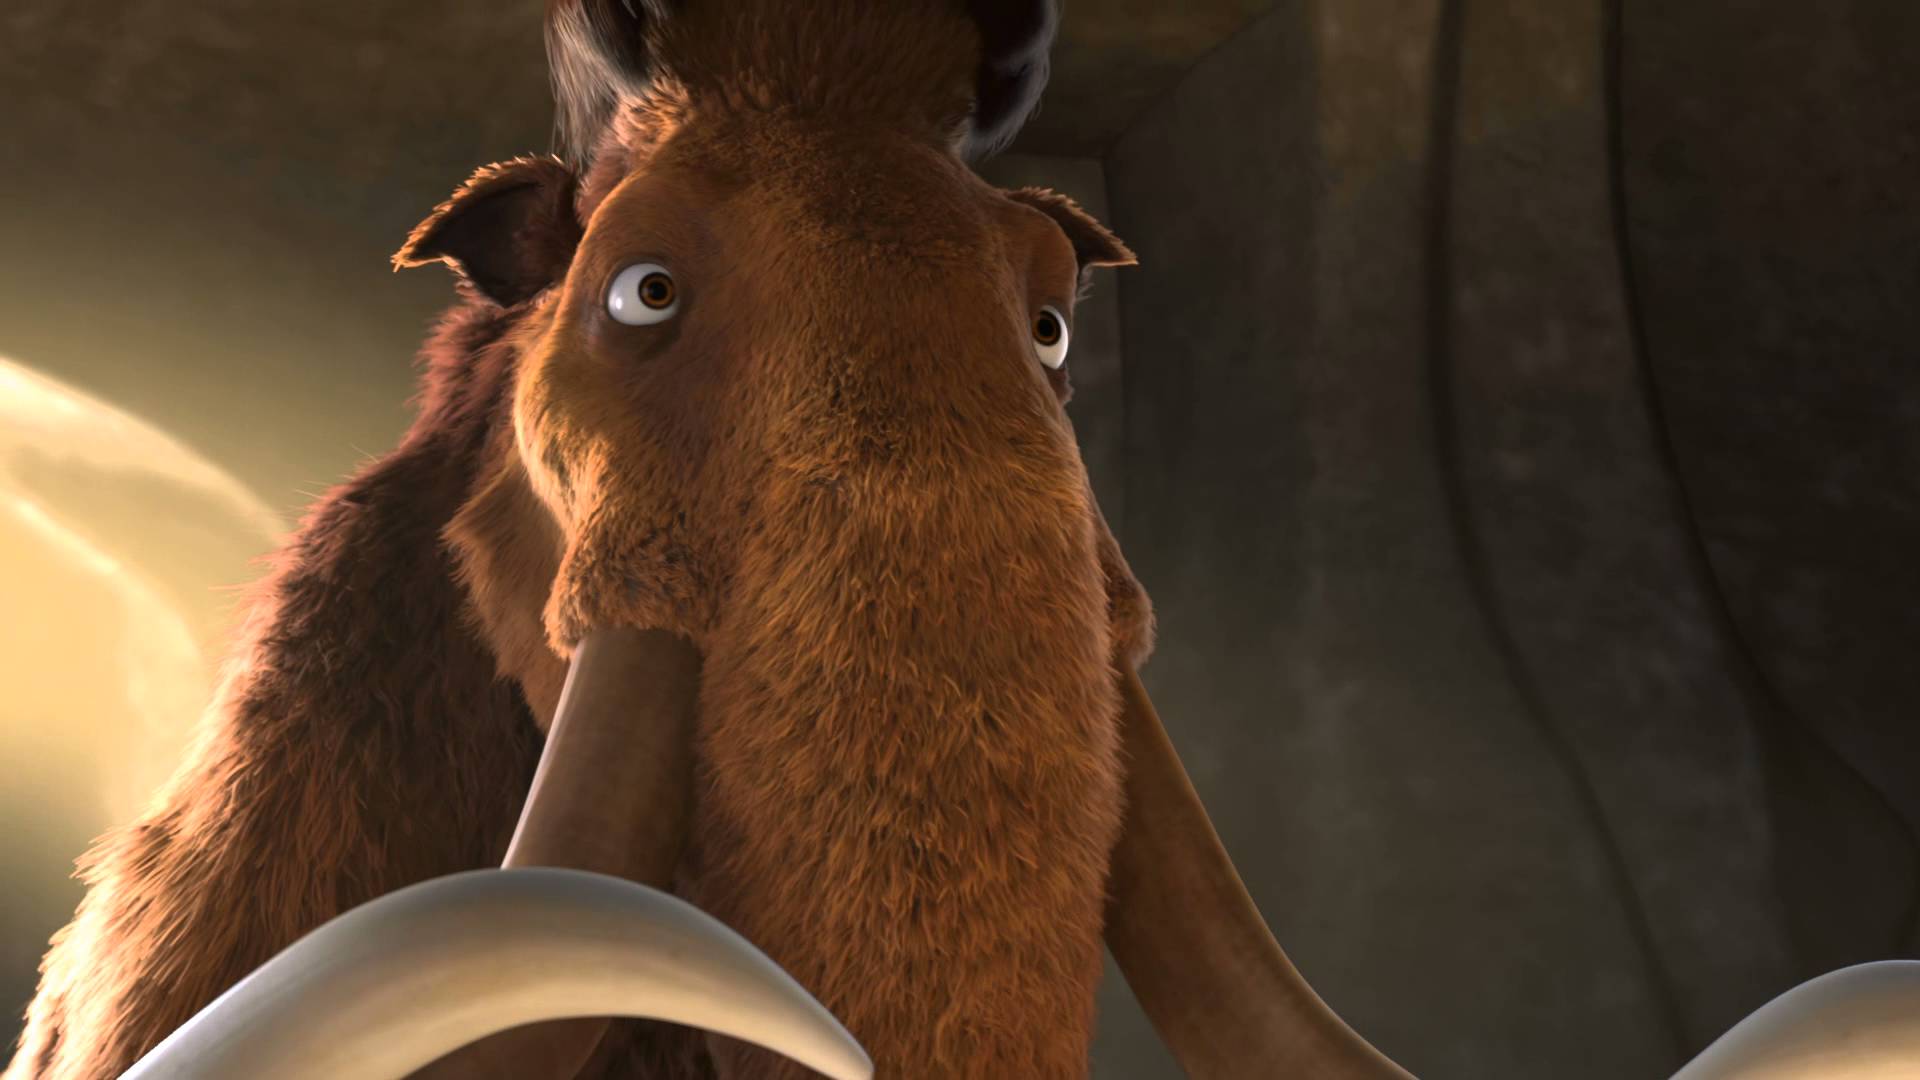 High Resolution Wallpaper | Ice Age: The Great Egg-Scapade 1920x1080 px